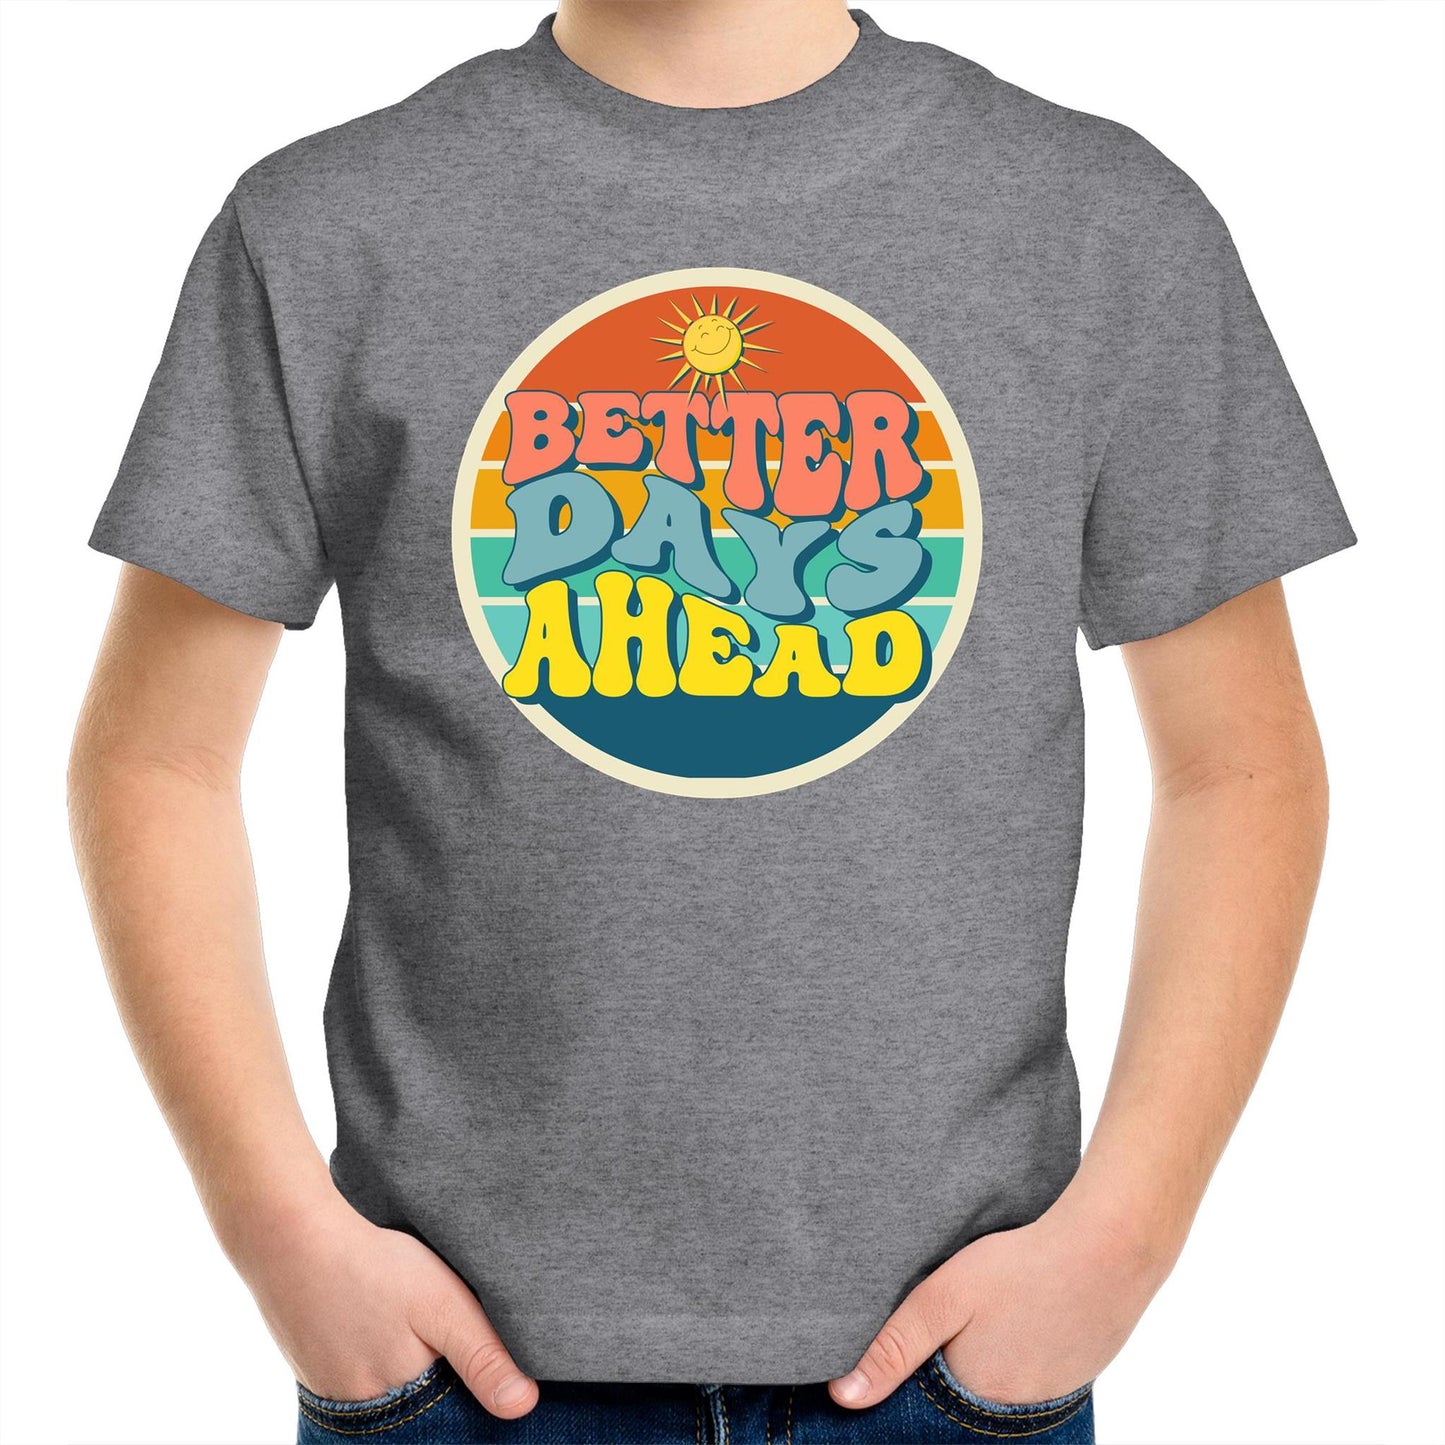 Better Days Ahead - Kids Youth T-Shirt Grey Marle Kids Youth T-shirt Motivation Retro